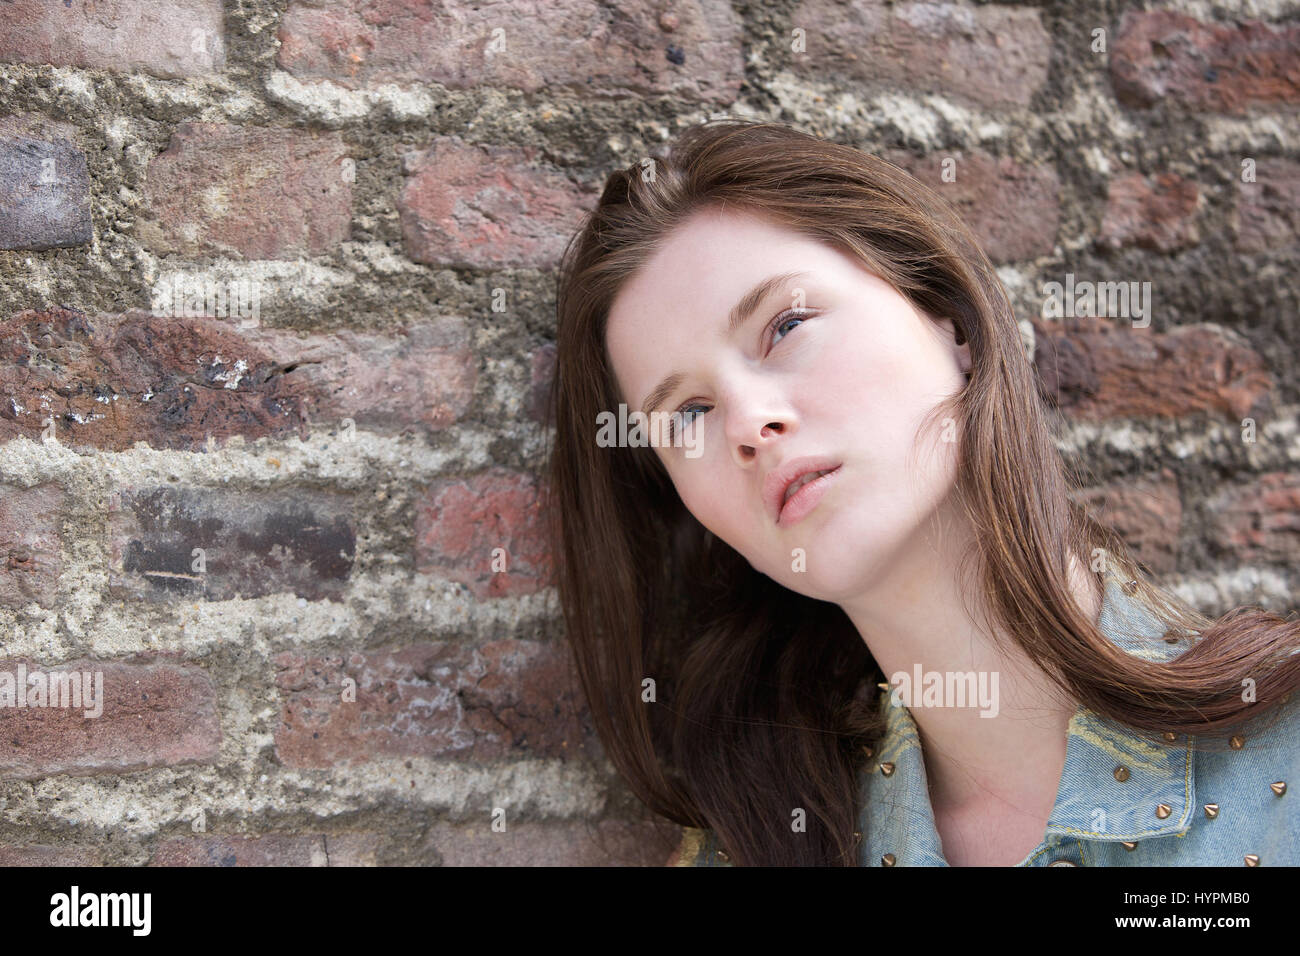 Close up portrait of a female fashion model posing against brick wall outdoors Stock Photo